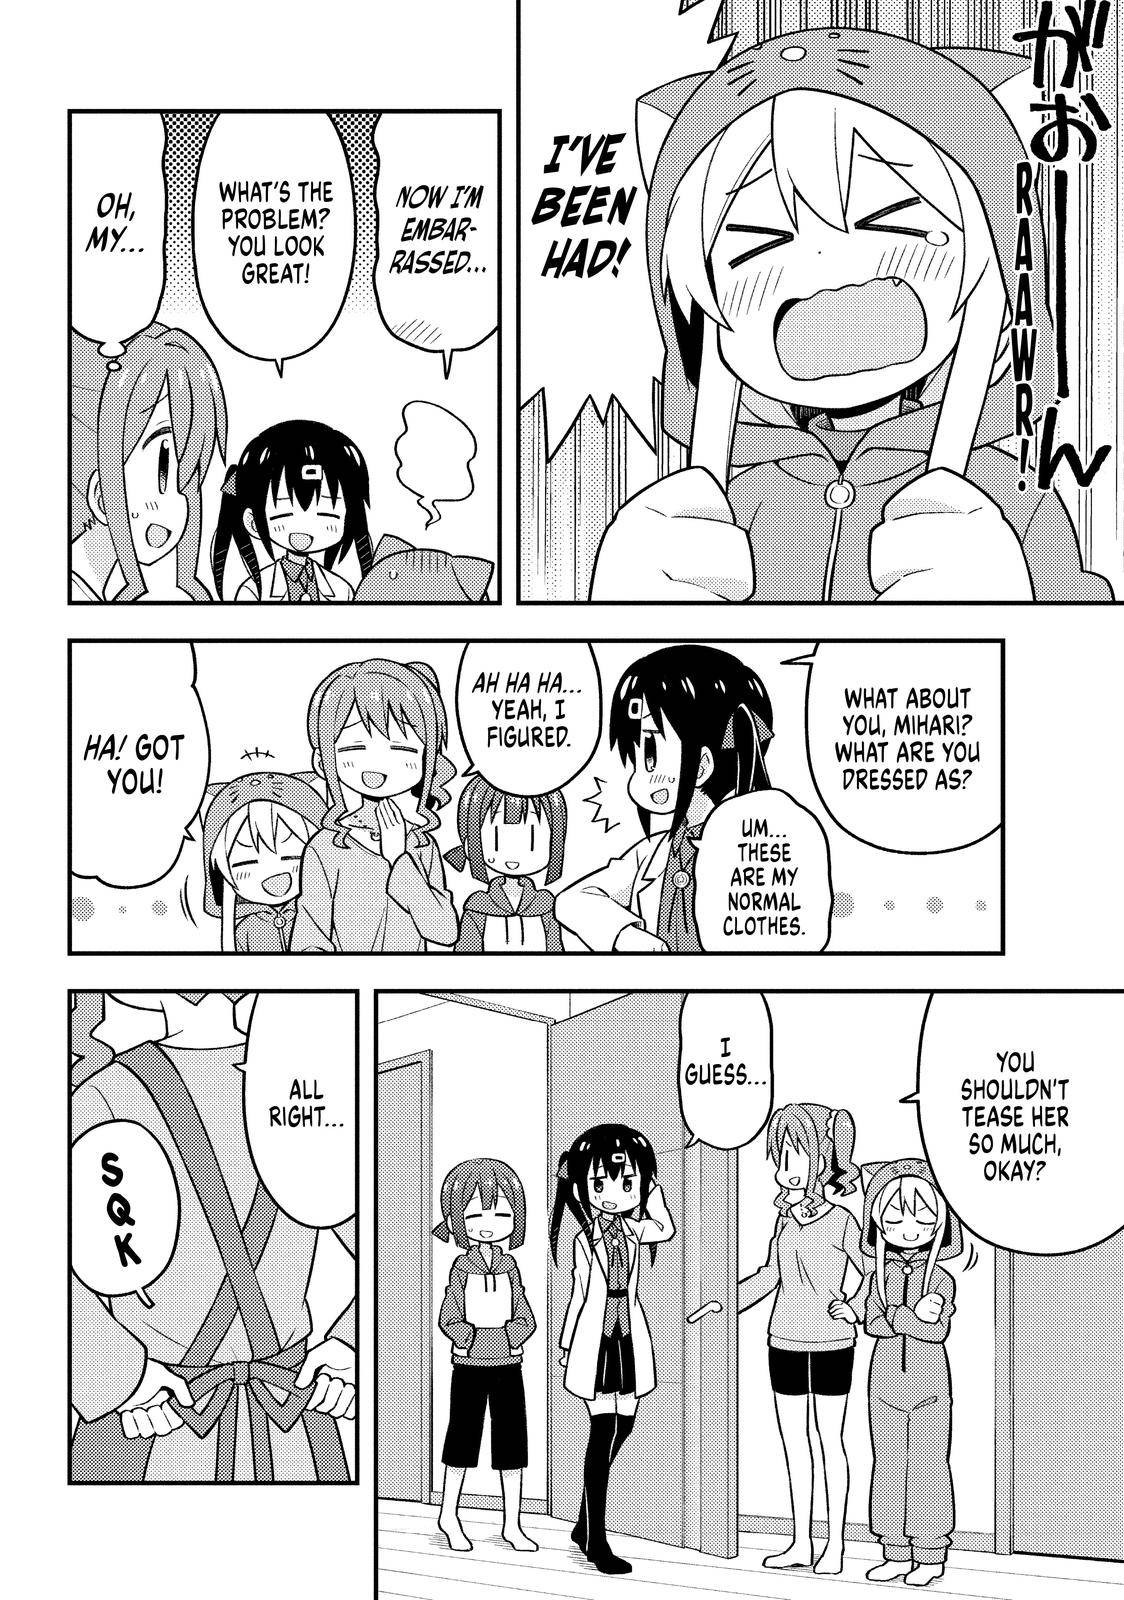 ONIMAI - I'm Now Your Sister! - chapter 15 - #4